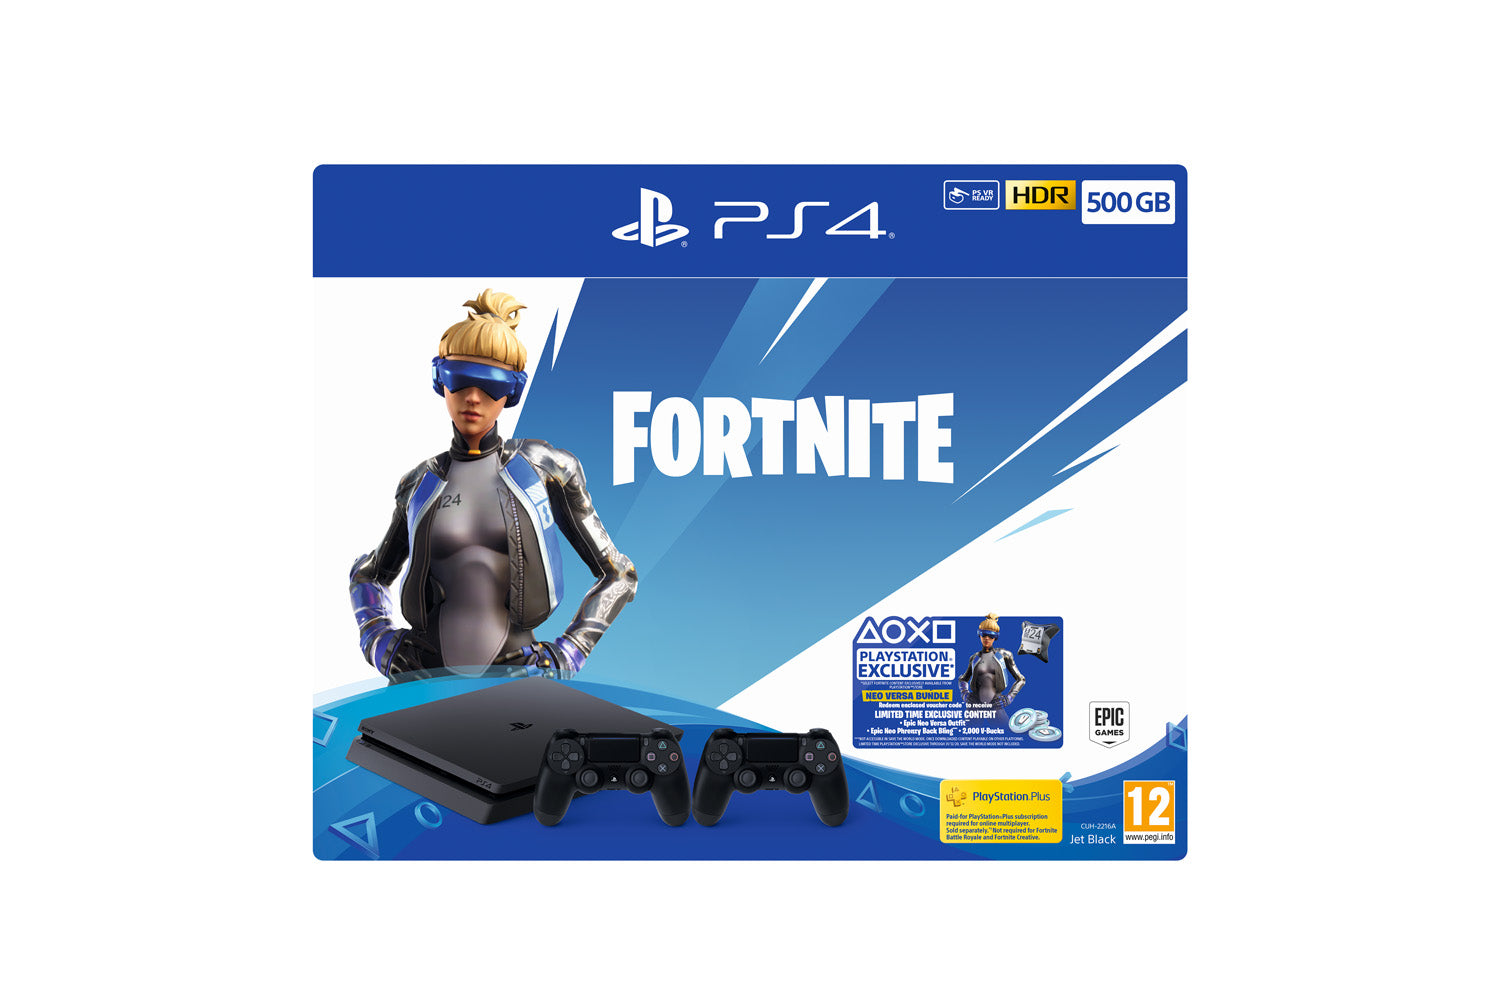 U&I Entertainment, Fortnite-Anime Legends Code In Box, Add-on Game Content  Only (Requires Free Download of Fortnite) 